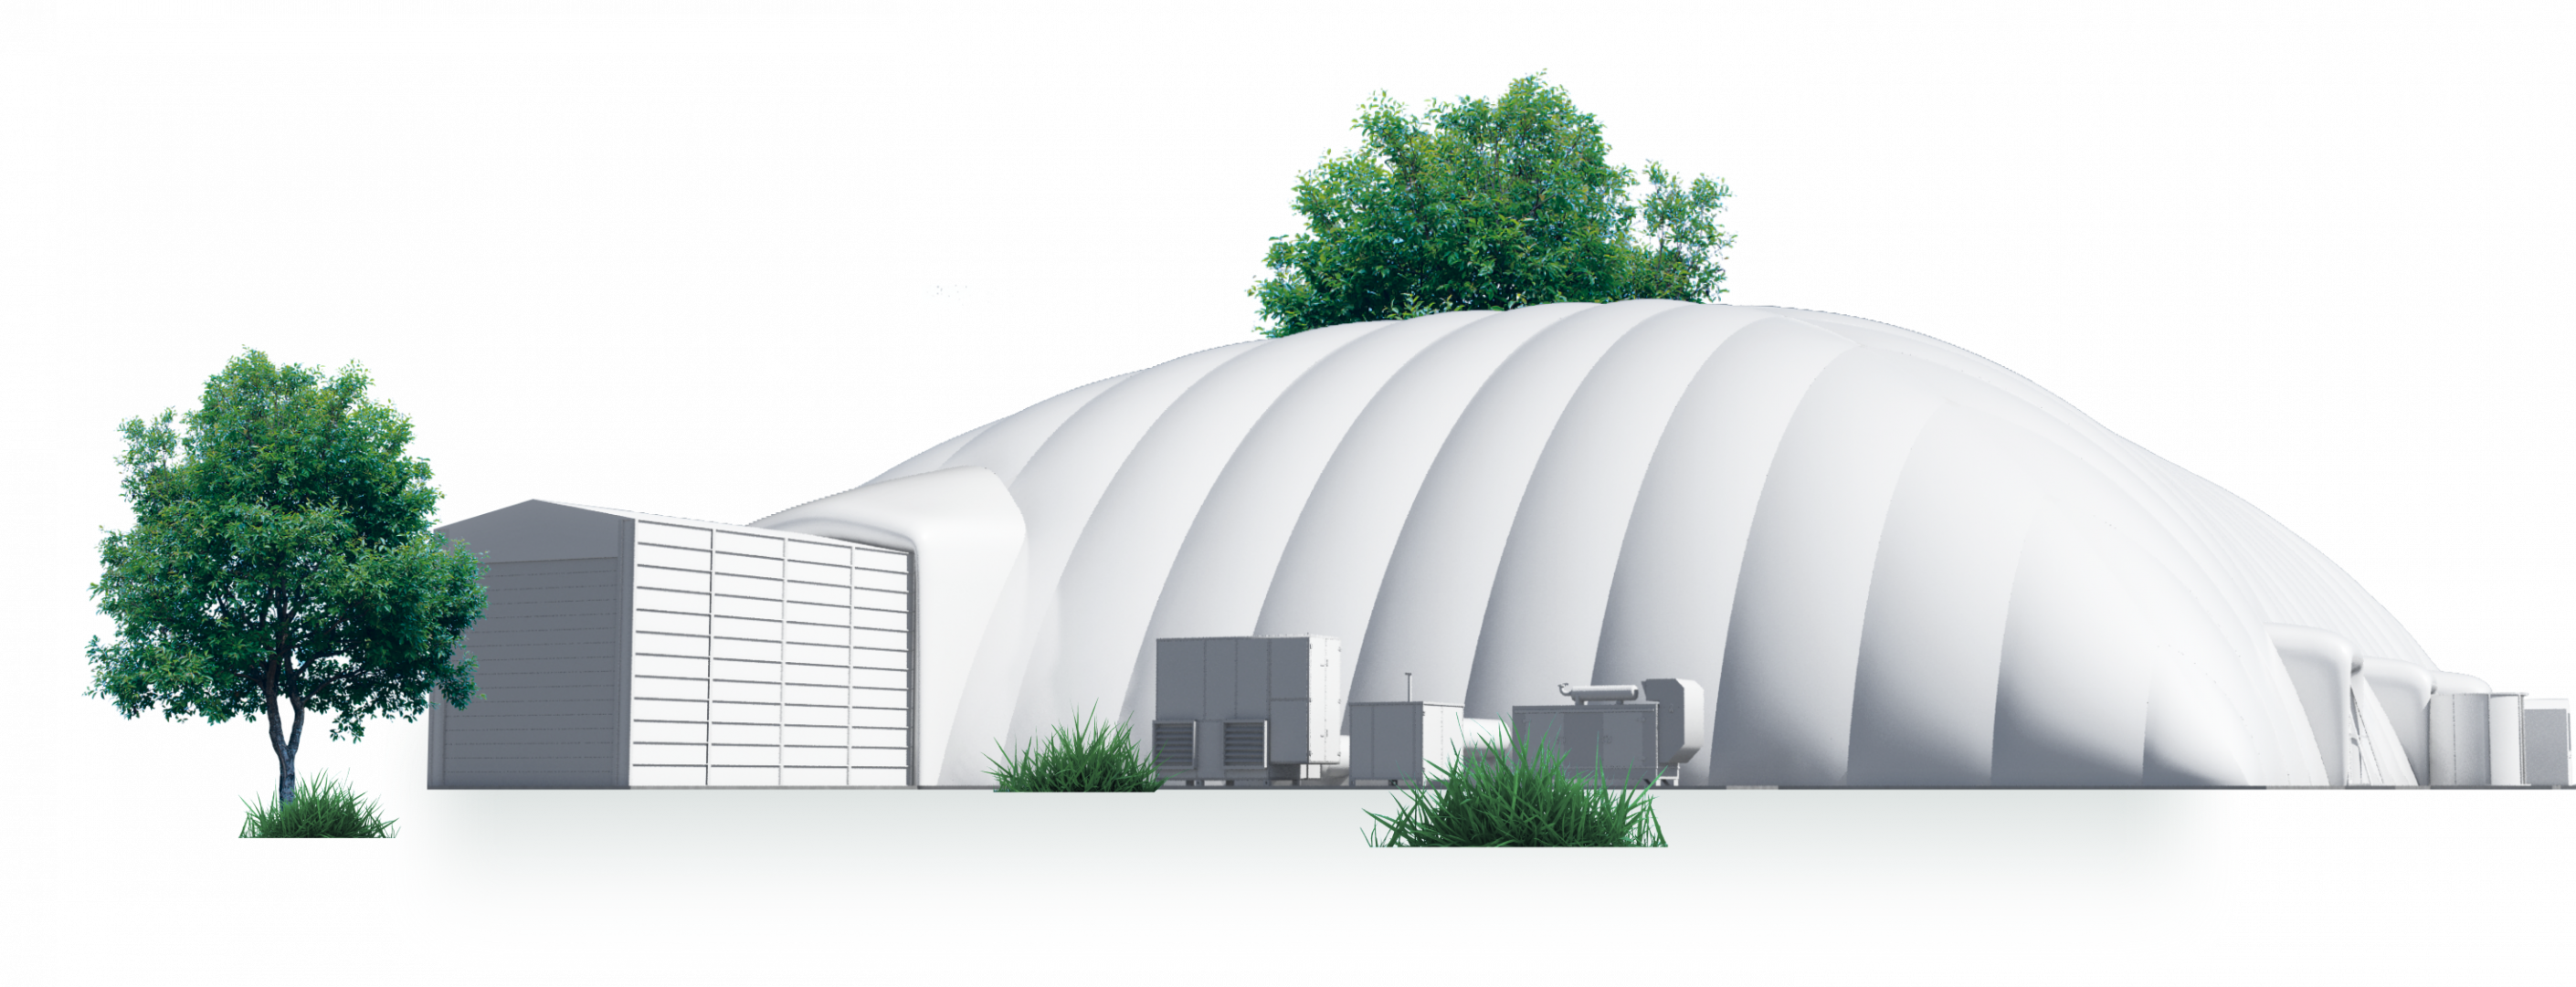 We provide the most <strong>sustainable</strong> air domes